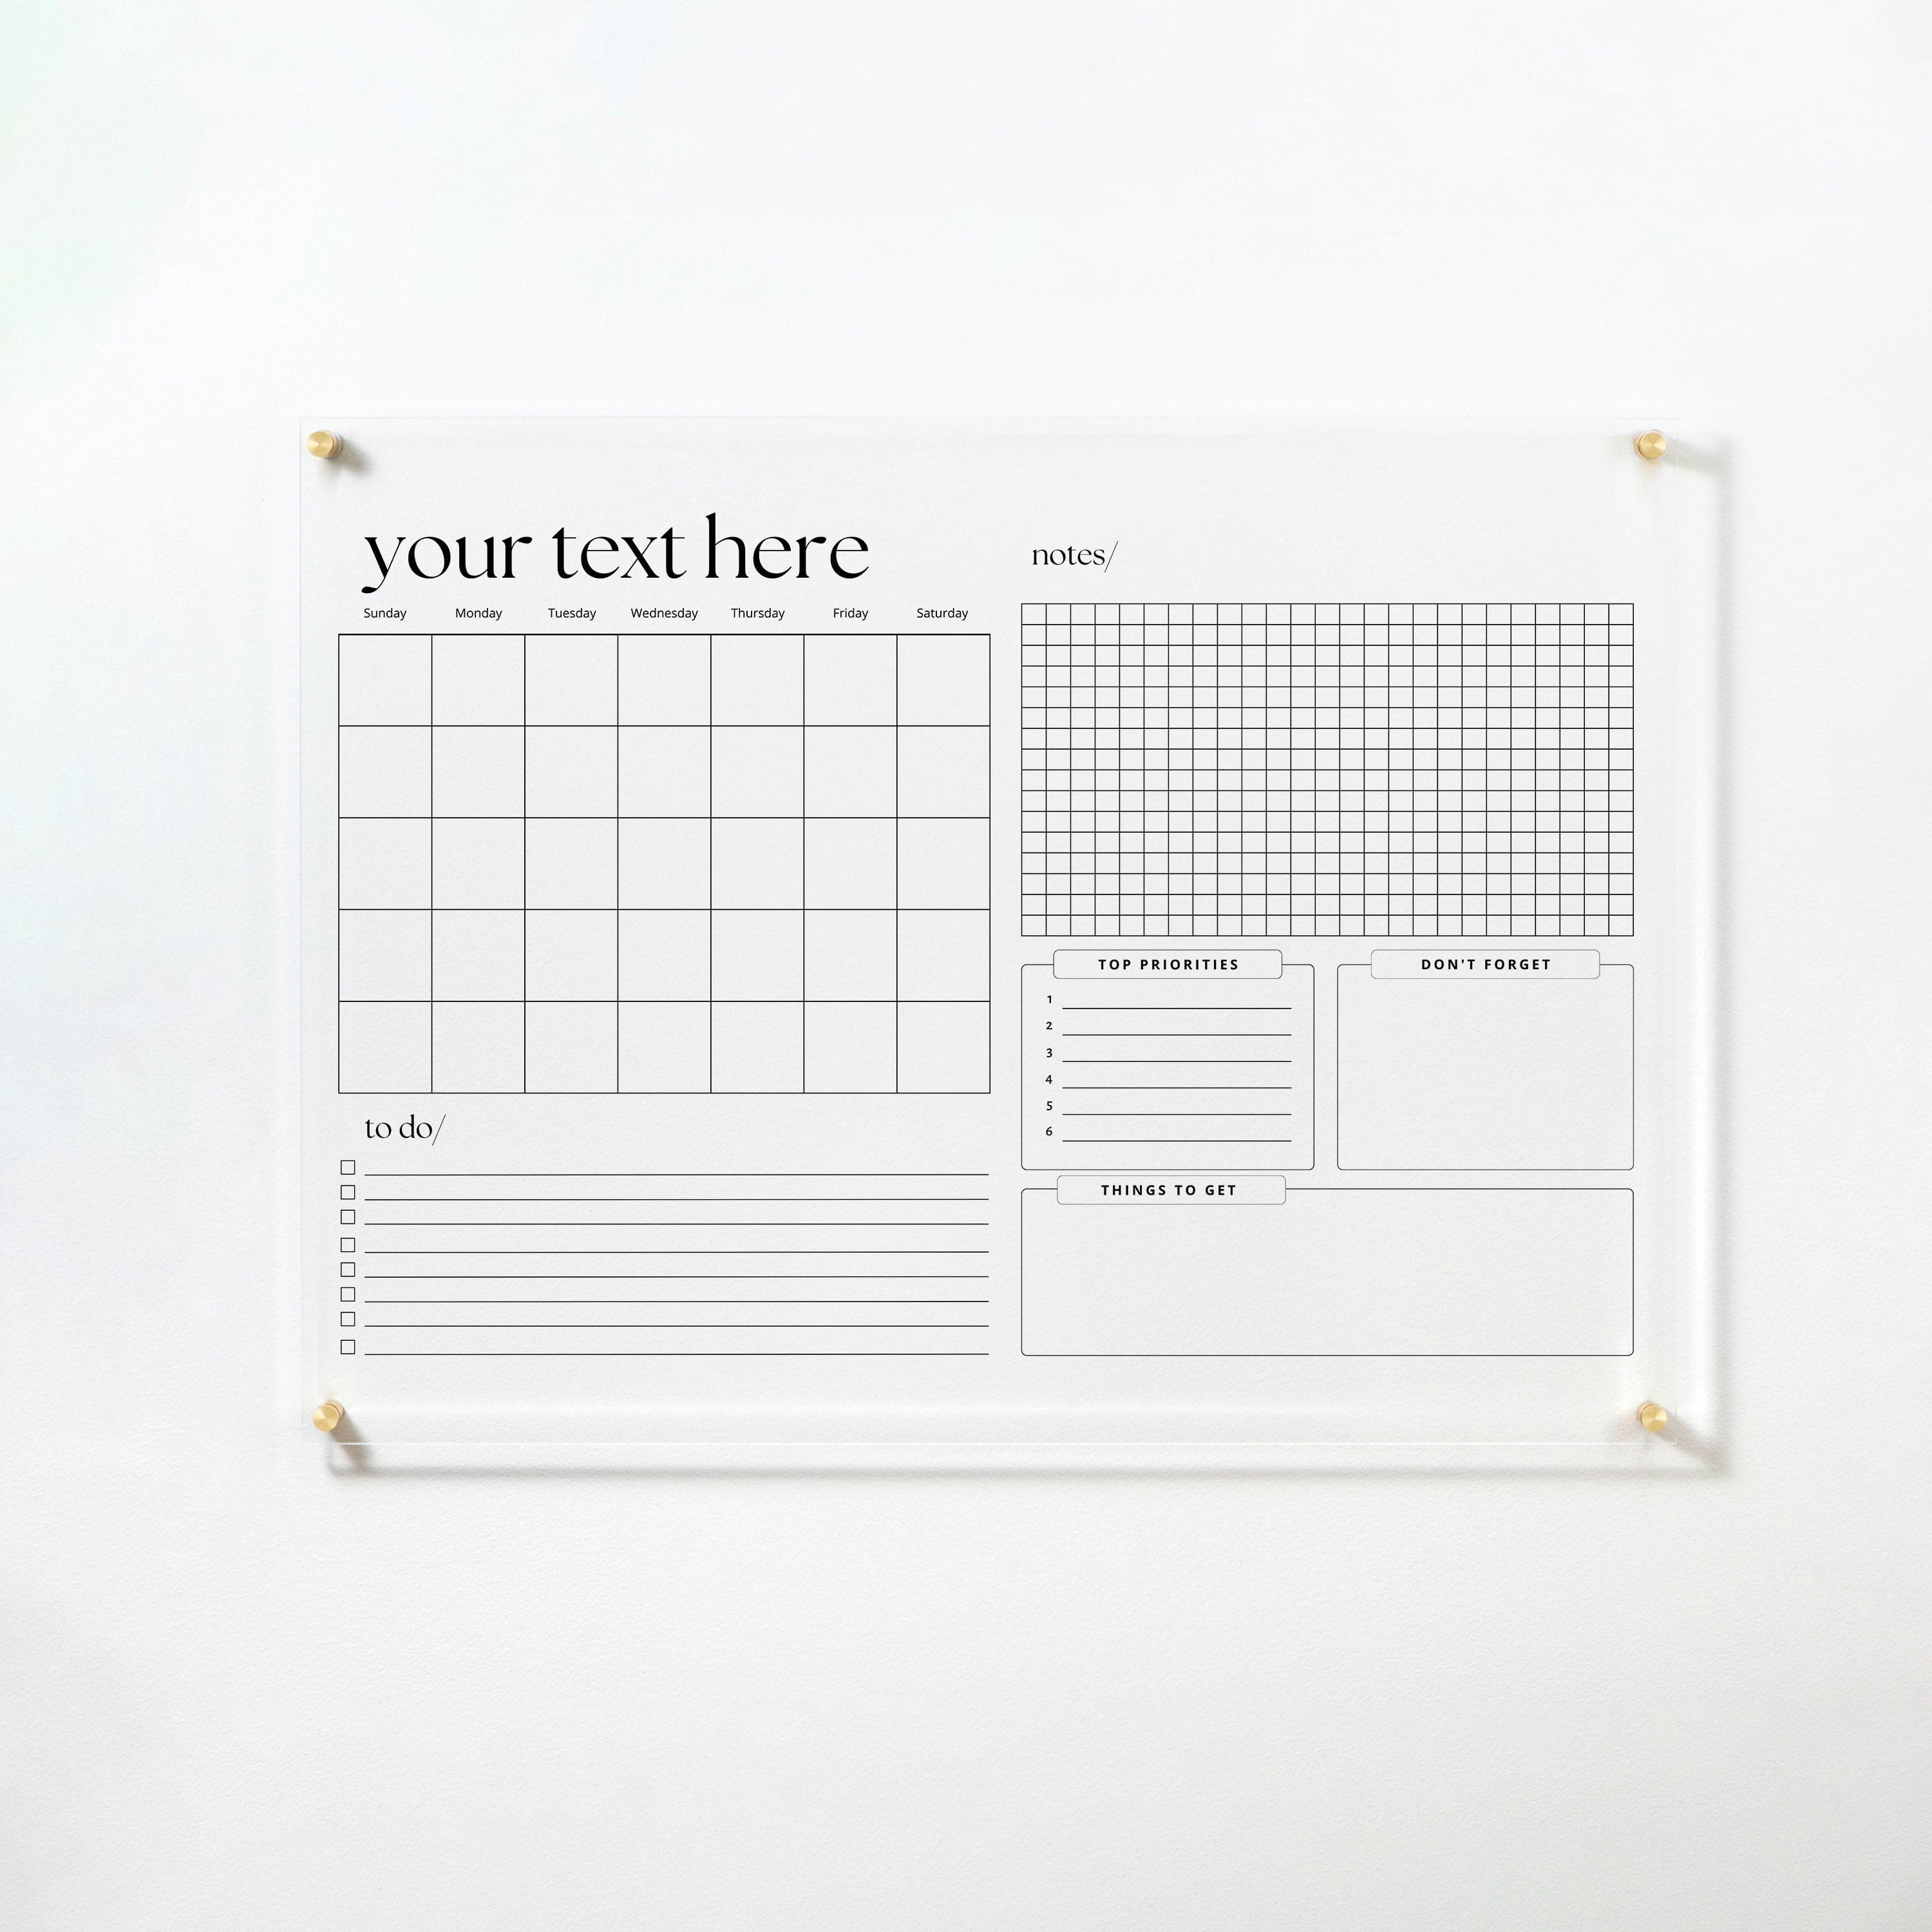 The full view of the same acrylic board, mounted on a white wall with gold pins. The board includes a monthly calendar, to-do list with checkboxes, a grid notes section, and areas for top priorities, things to get, and don't forget, all in a sleek black and white design.